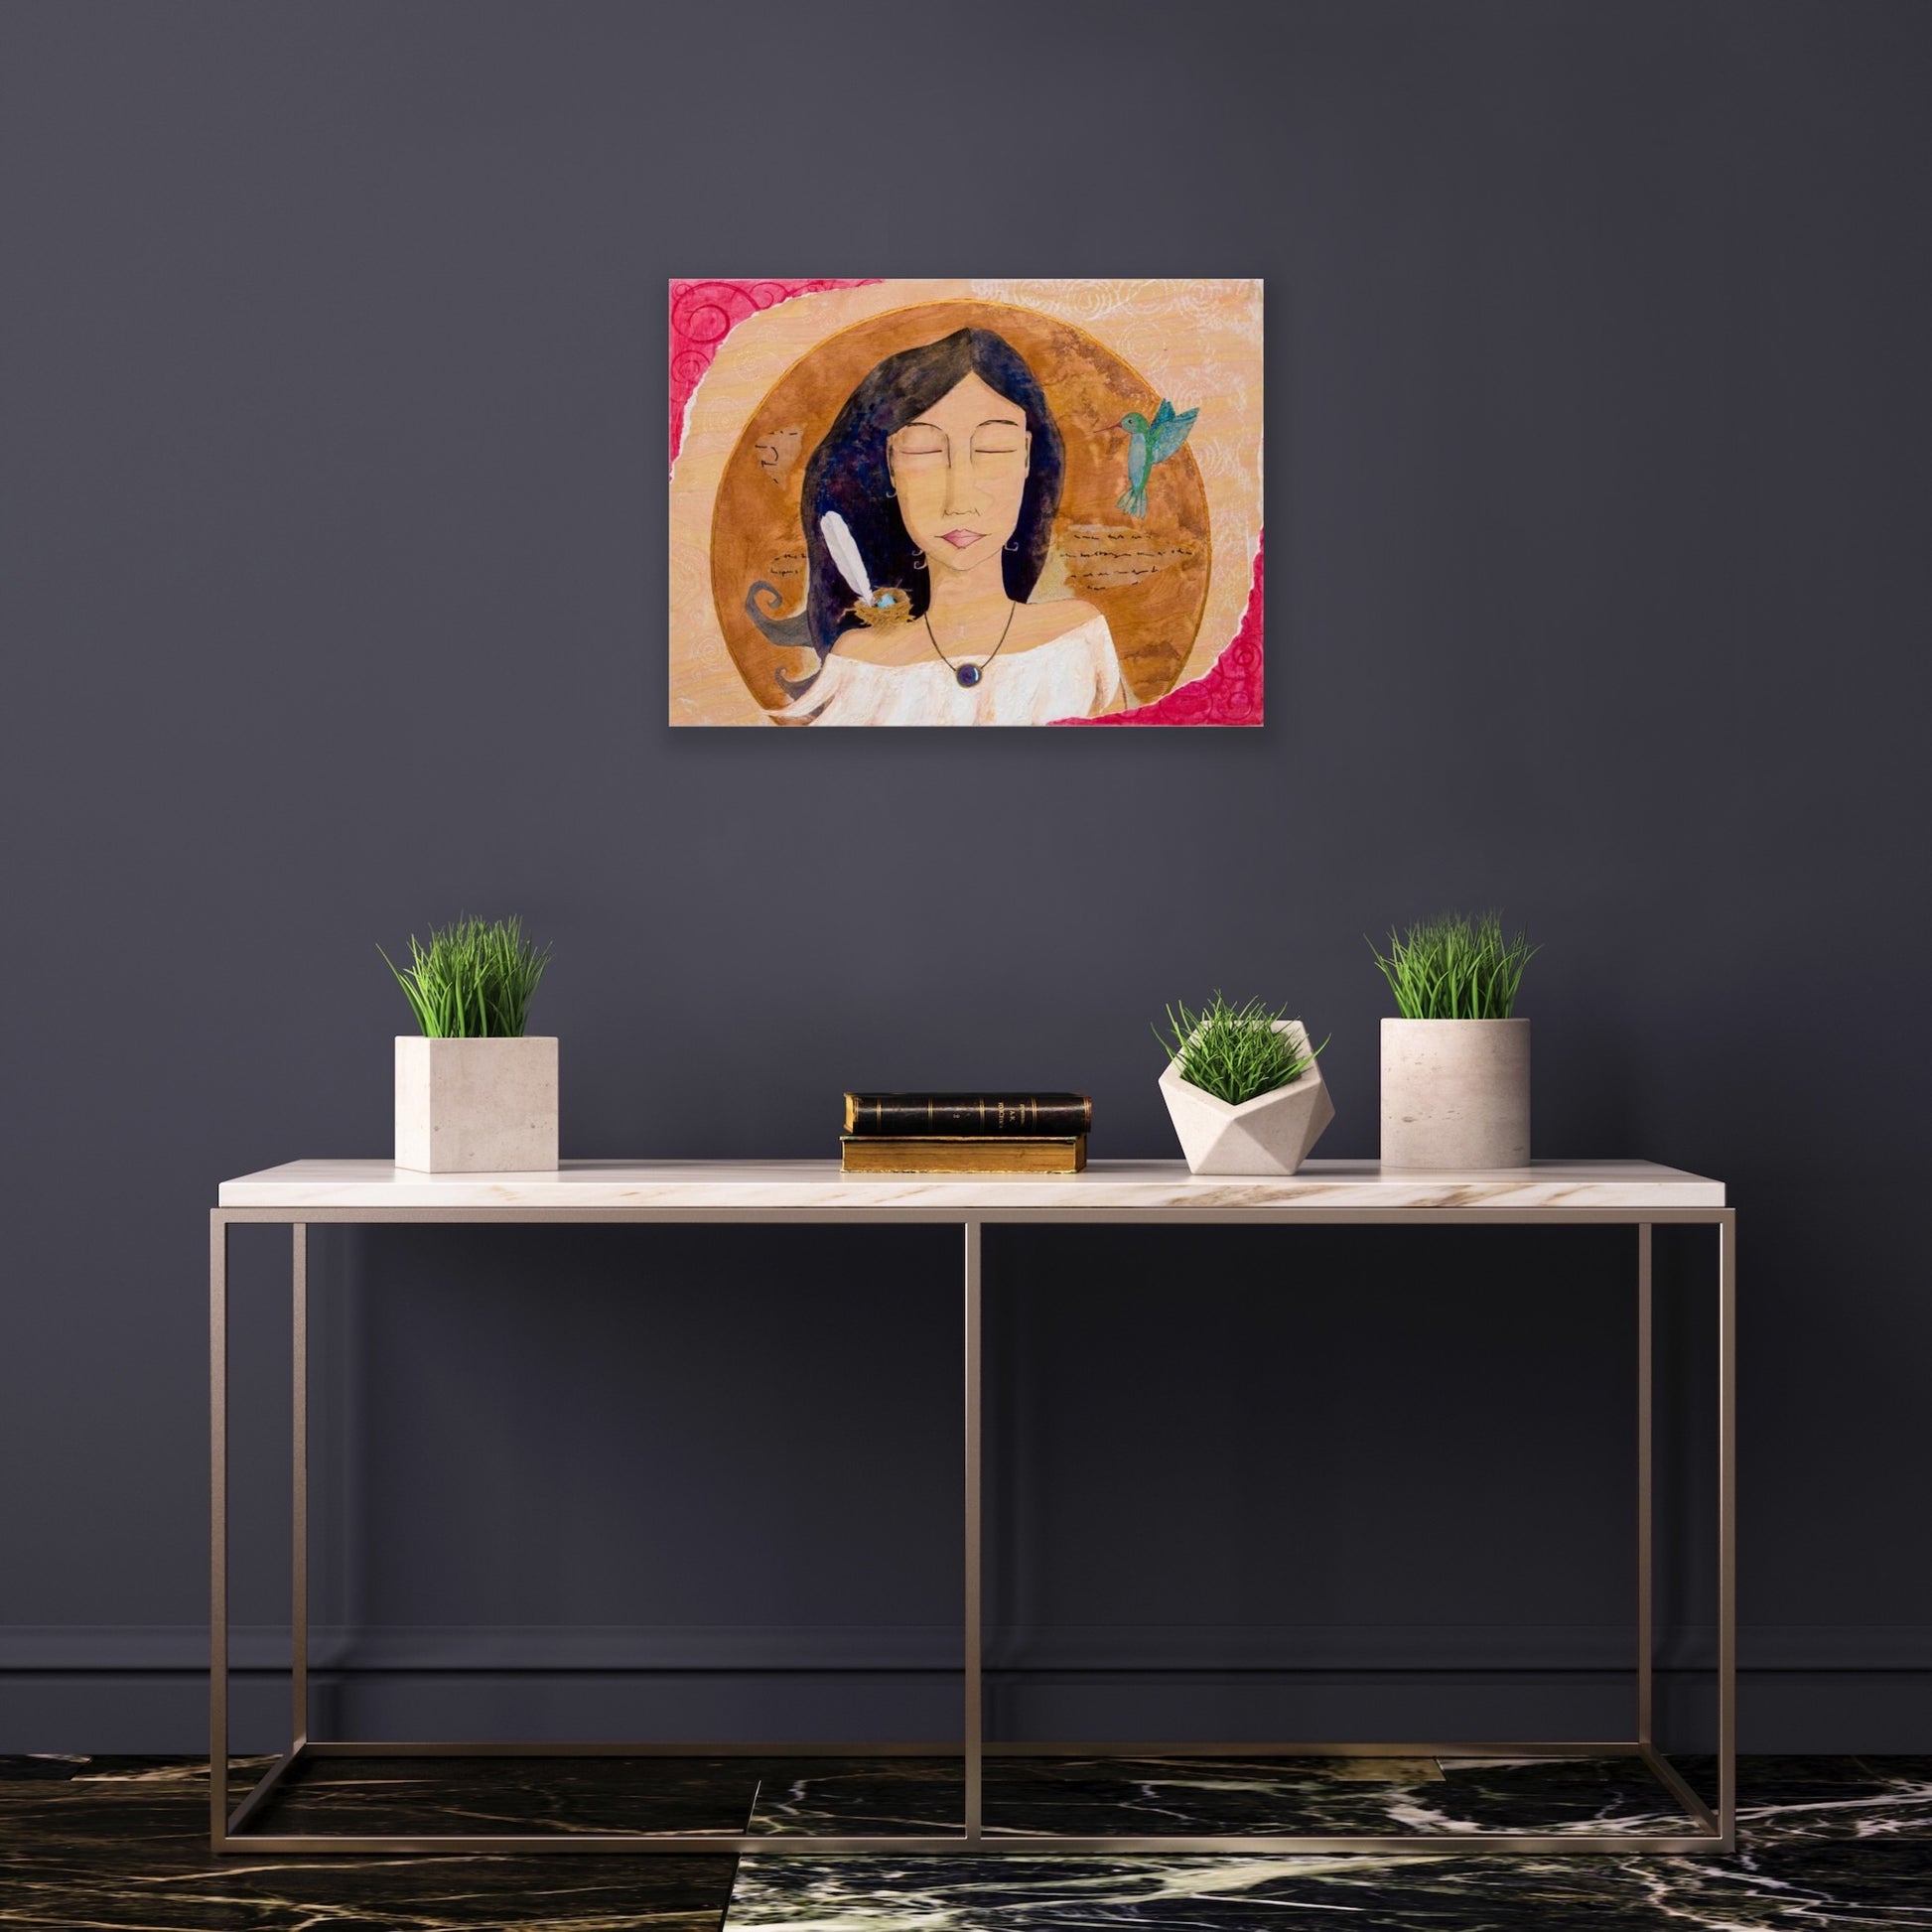 spiritual feminine artwork hanging on a dark grey wall above a white table with geometric concrete planters on it.